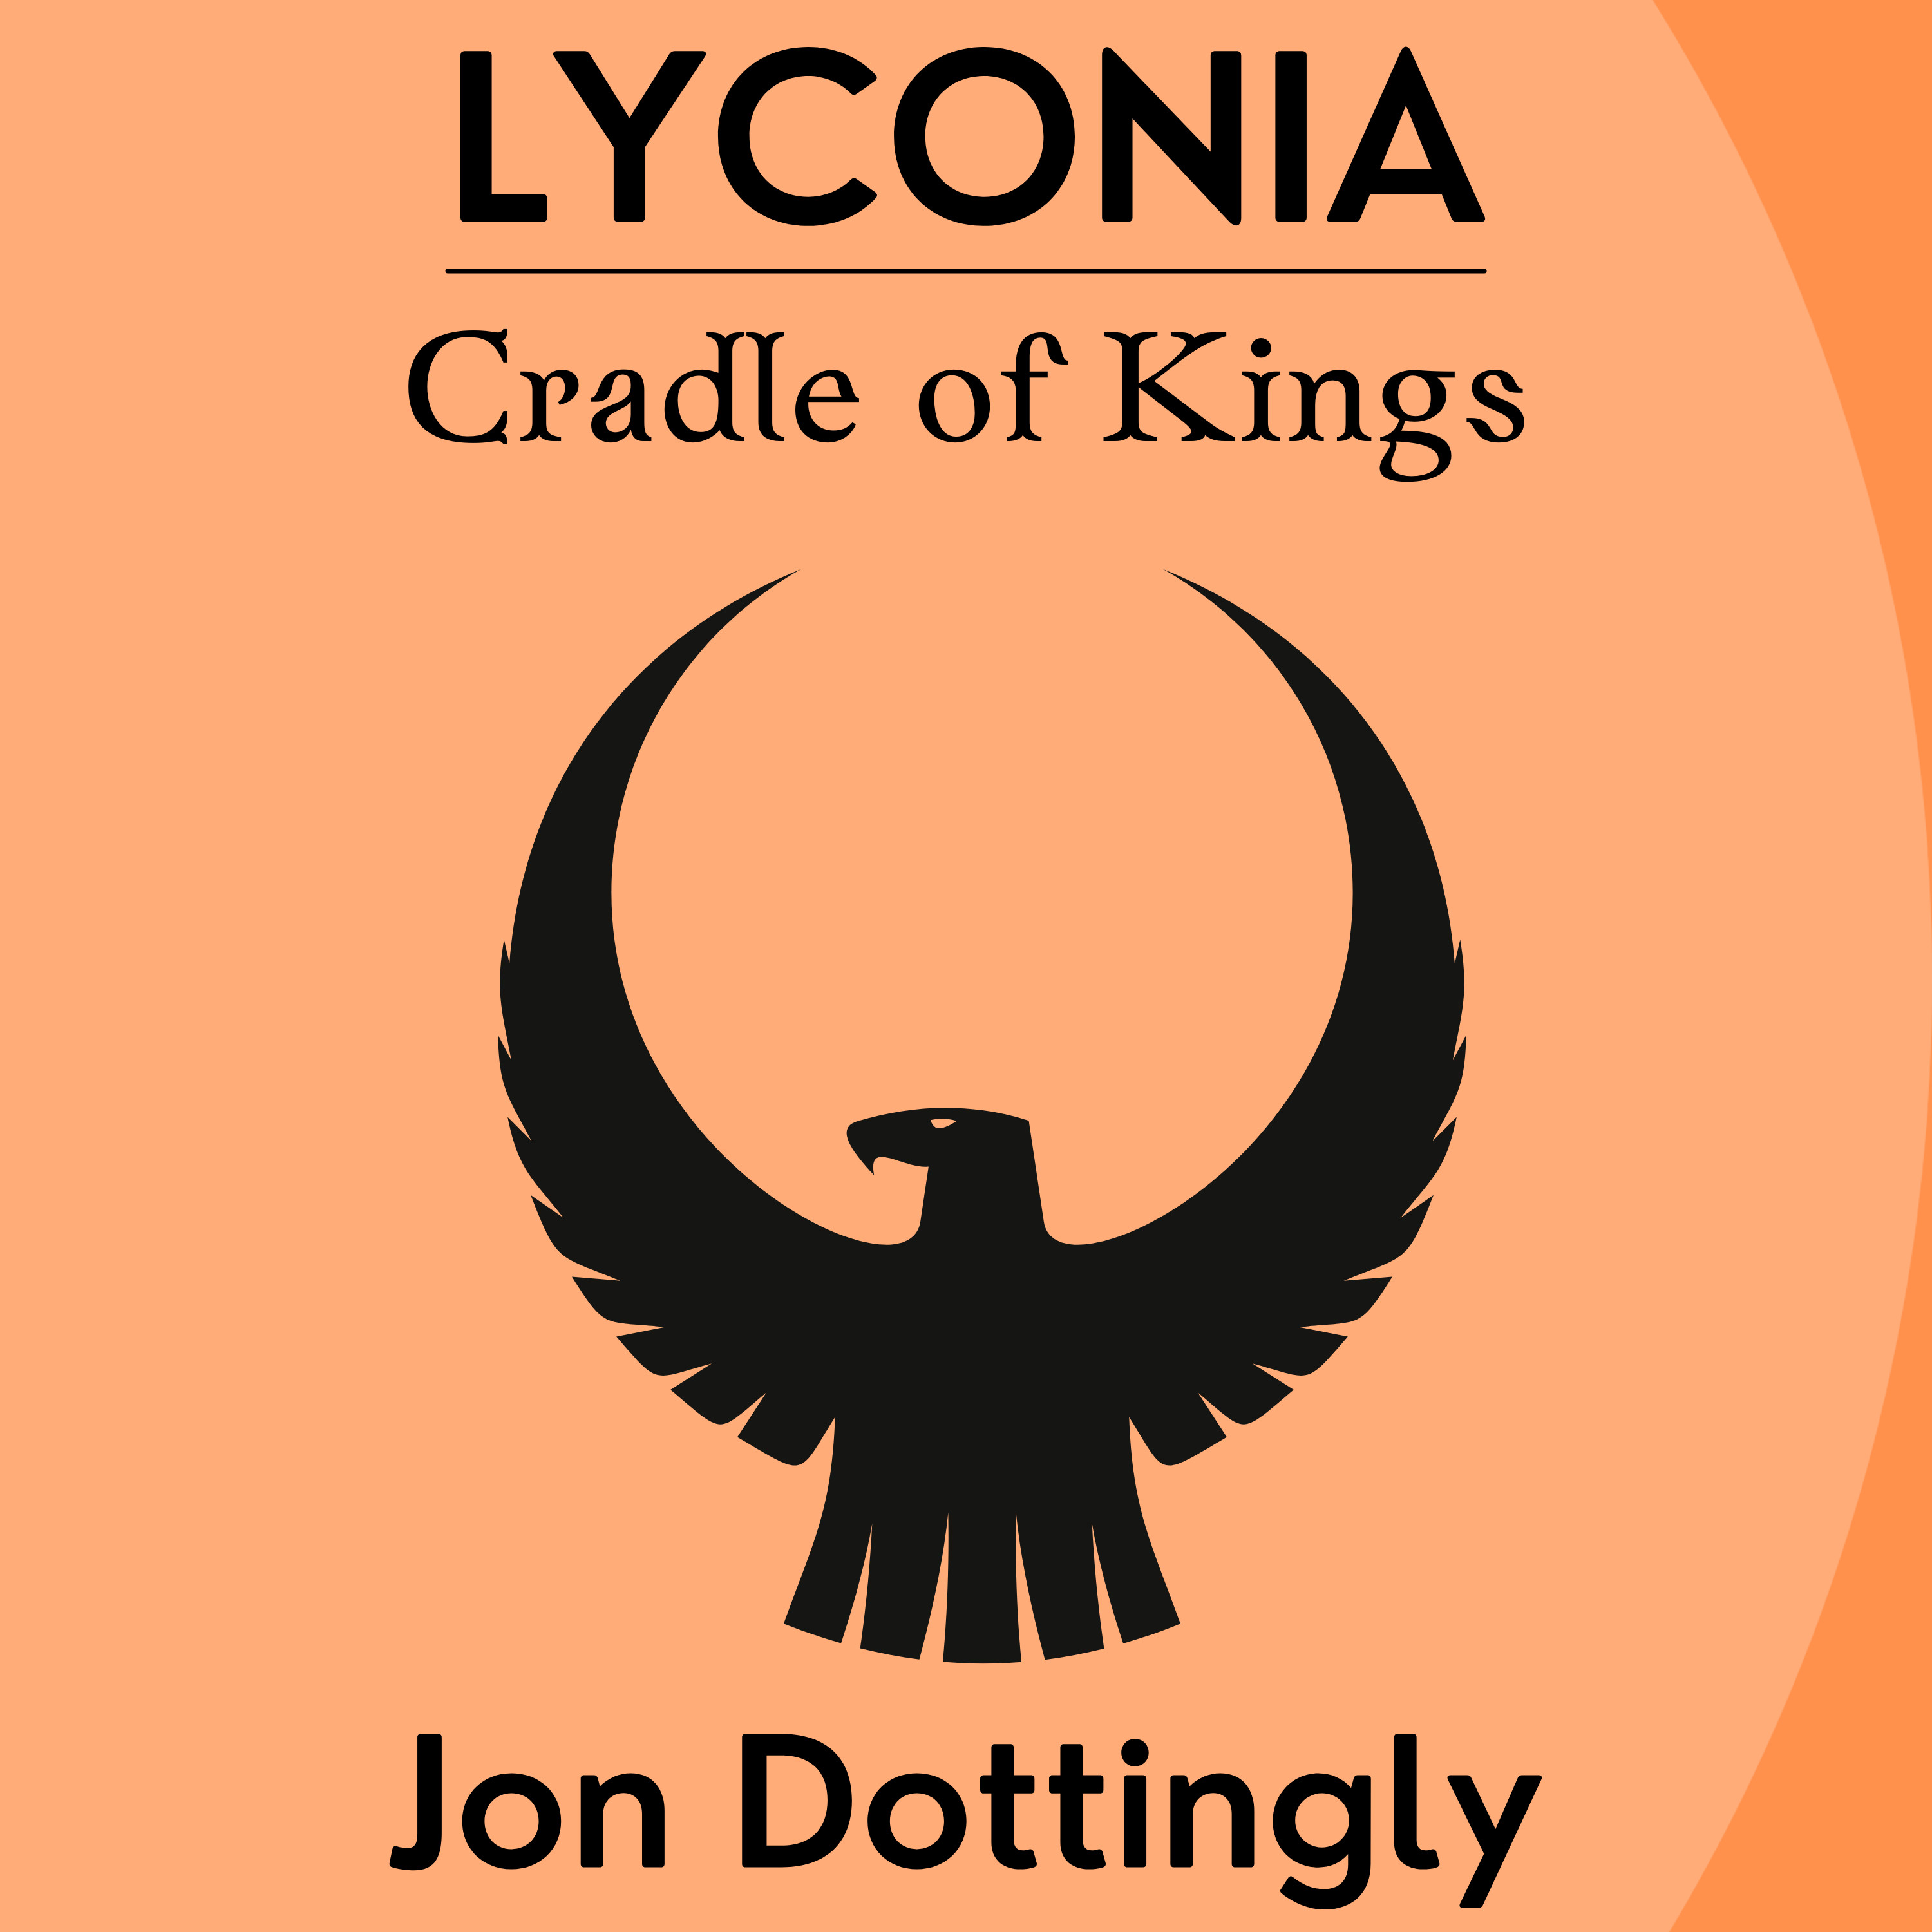 Lyconia: Cradle of Kings